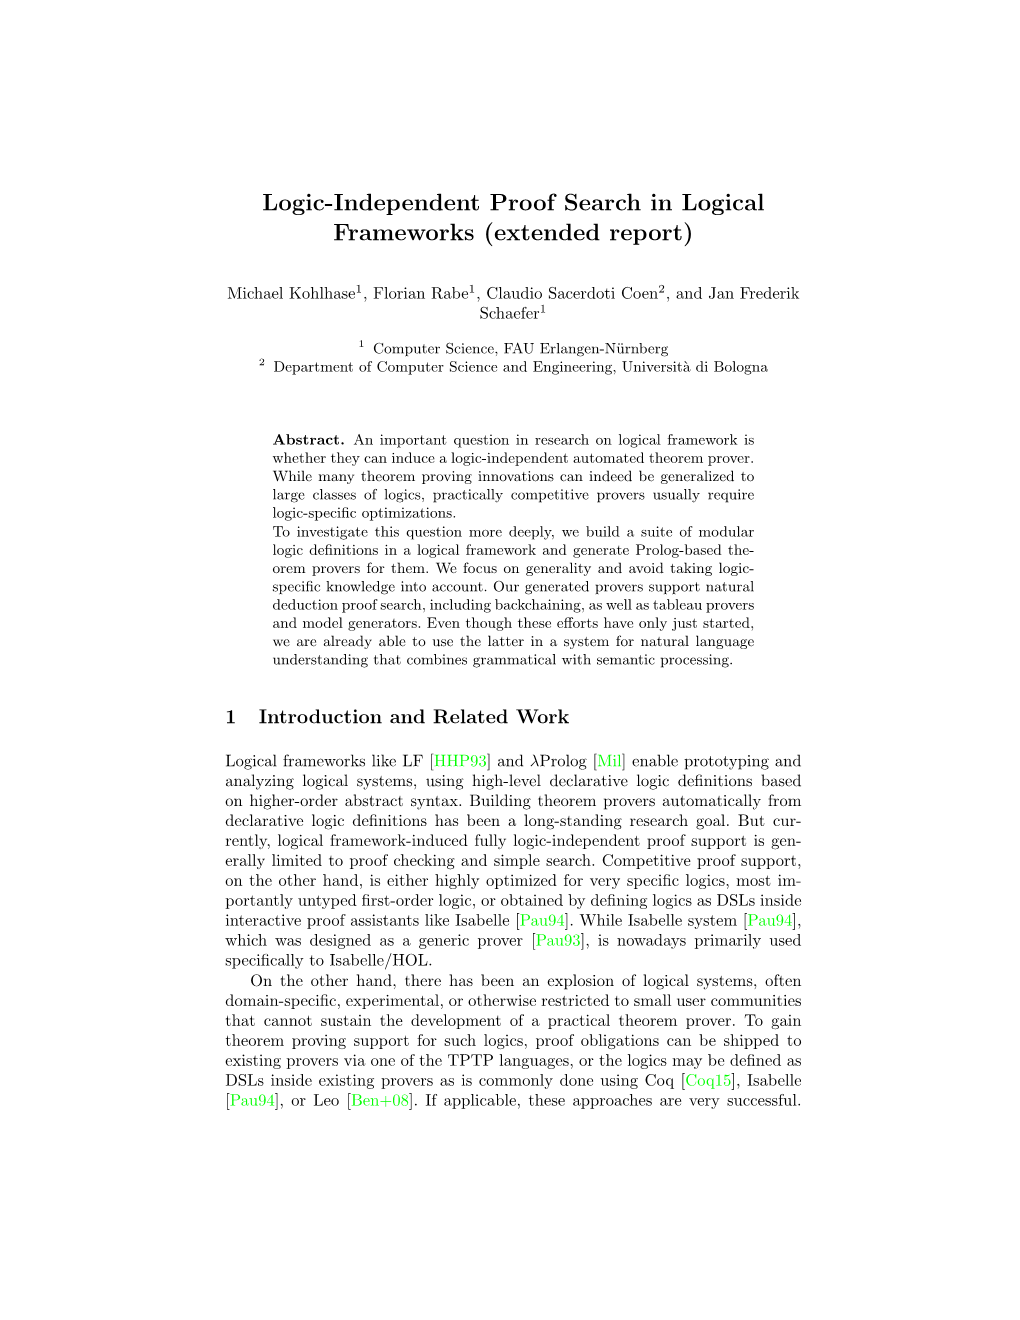 Logic-Independent Proof Search in Logical Frameworks (Extended Report)